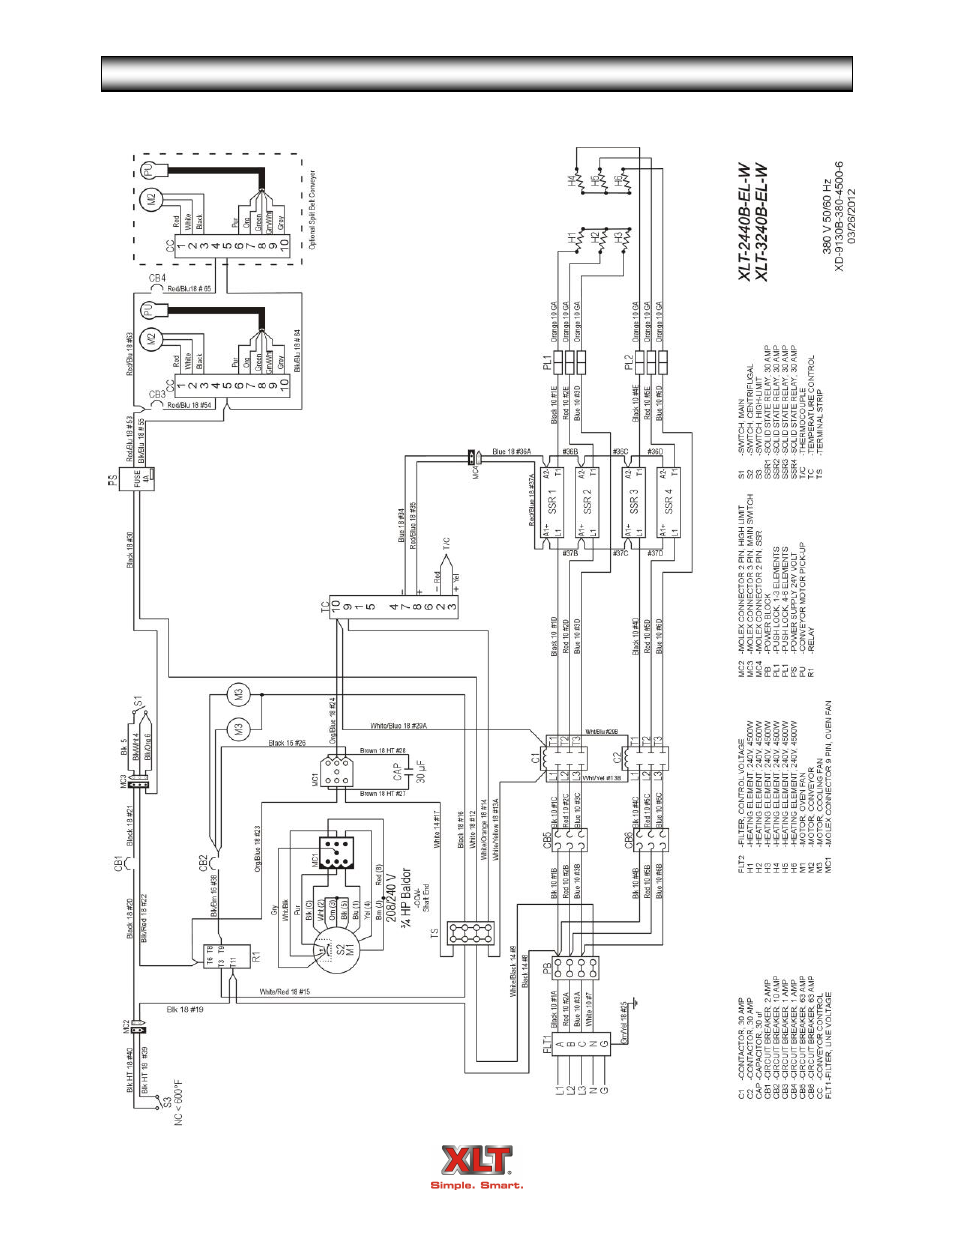 Oven schematic - world | XLT XD-9007A (ELEC Oven Version – B1, AVI Hood Version – B) User Manual | Page 51 / 56